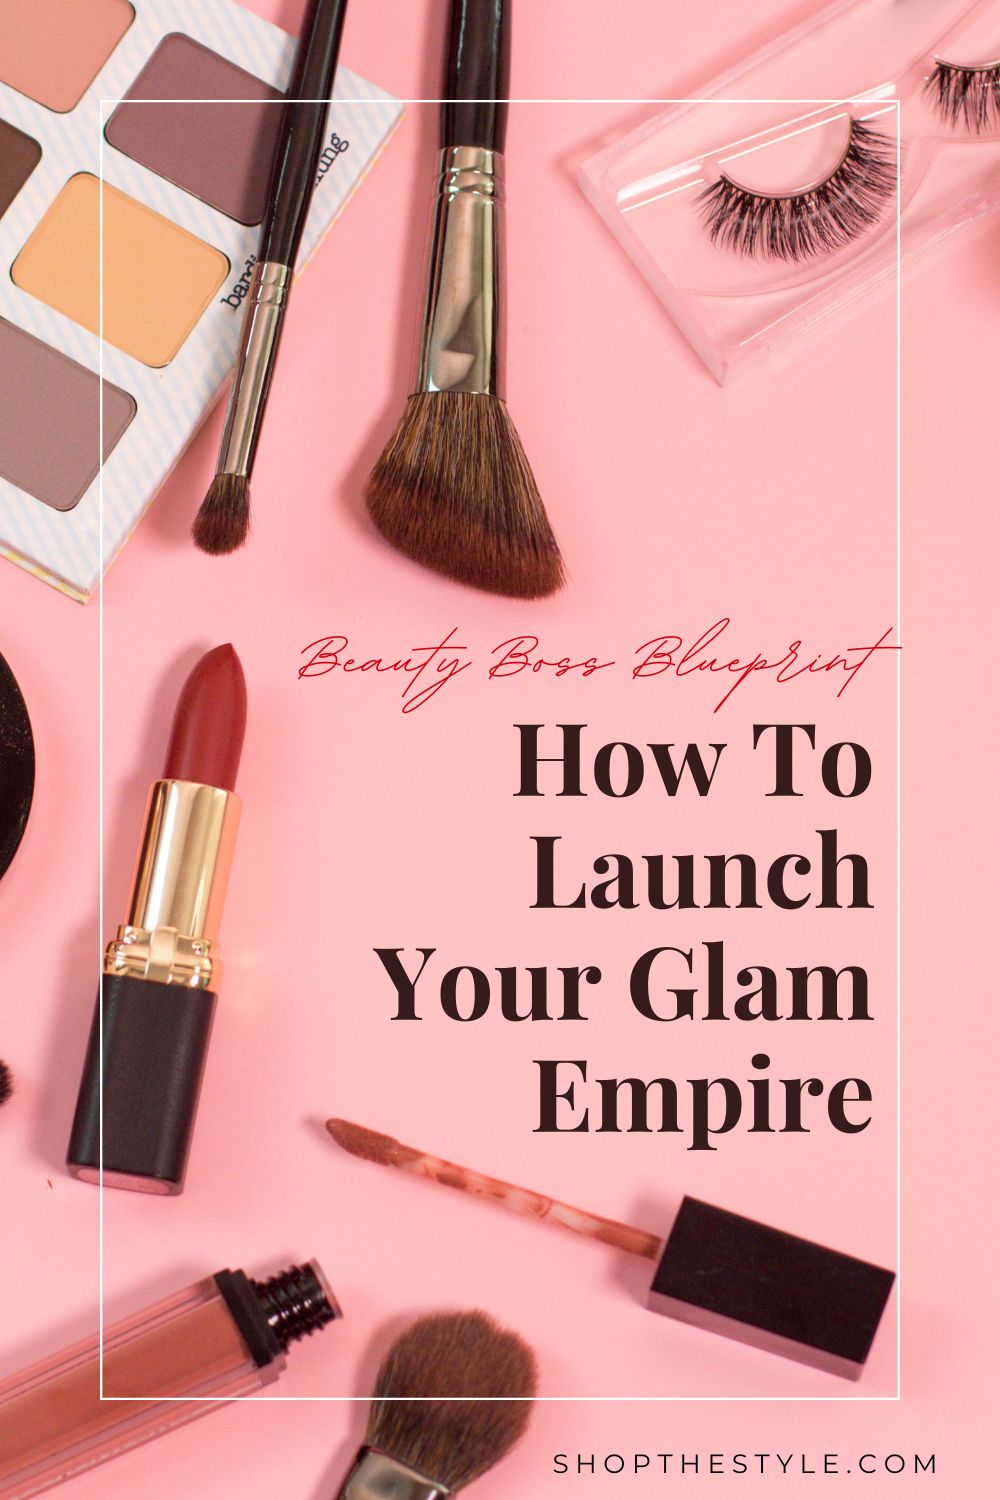 Beauty Boss Blueprint 7 Tips for Launching Your Glam Empire